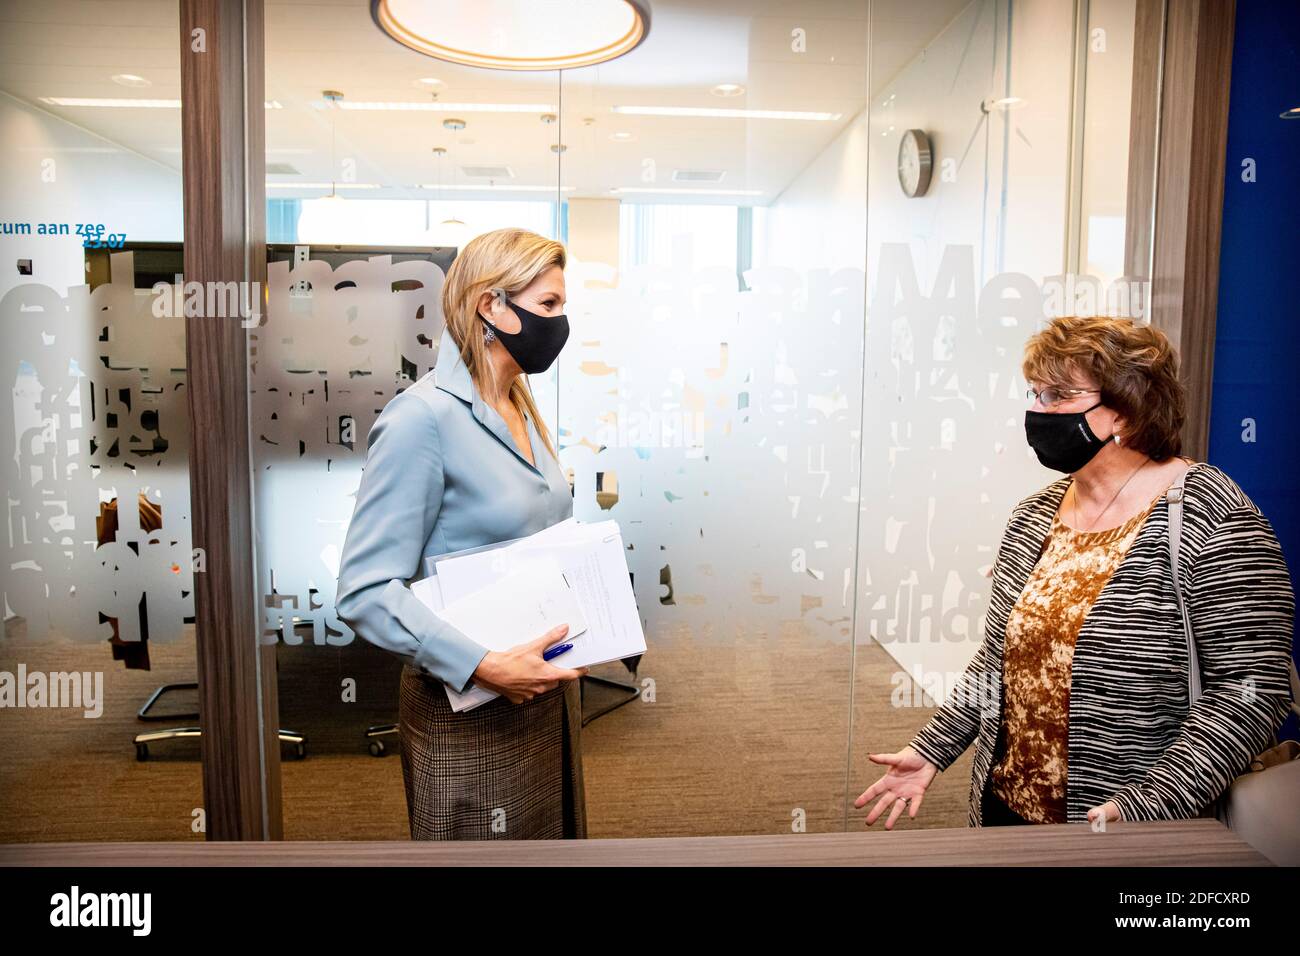 Queen Maxima of the Netherlands visits the Dutch employee insurances (UWV) in Amsterdam, 4 December 2020. Queen Maxima visits the UWV as member of the Dutch Committee for Entrepreneurship together with Mariette Hamer of the Social Ecomic Council. Photo: Patrick van Katwijk/ | Stock Photo